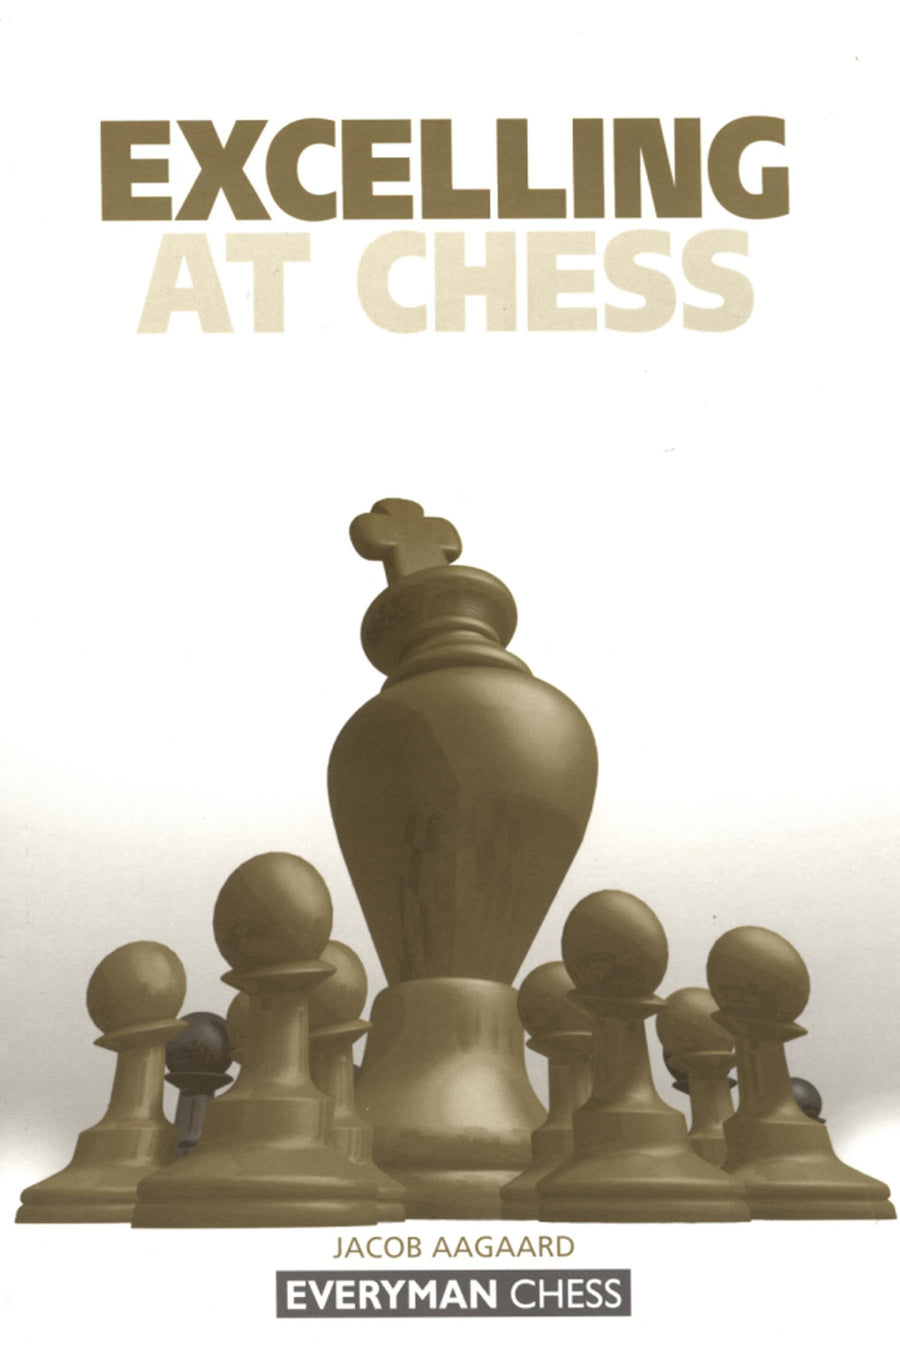 Chess Combinations Vol. 1 on the App Store